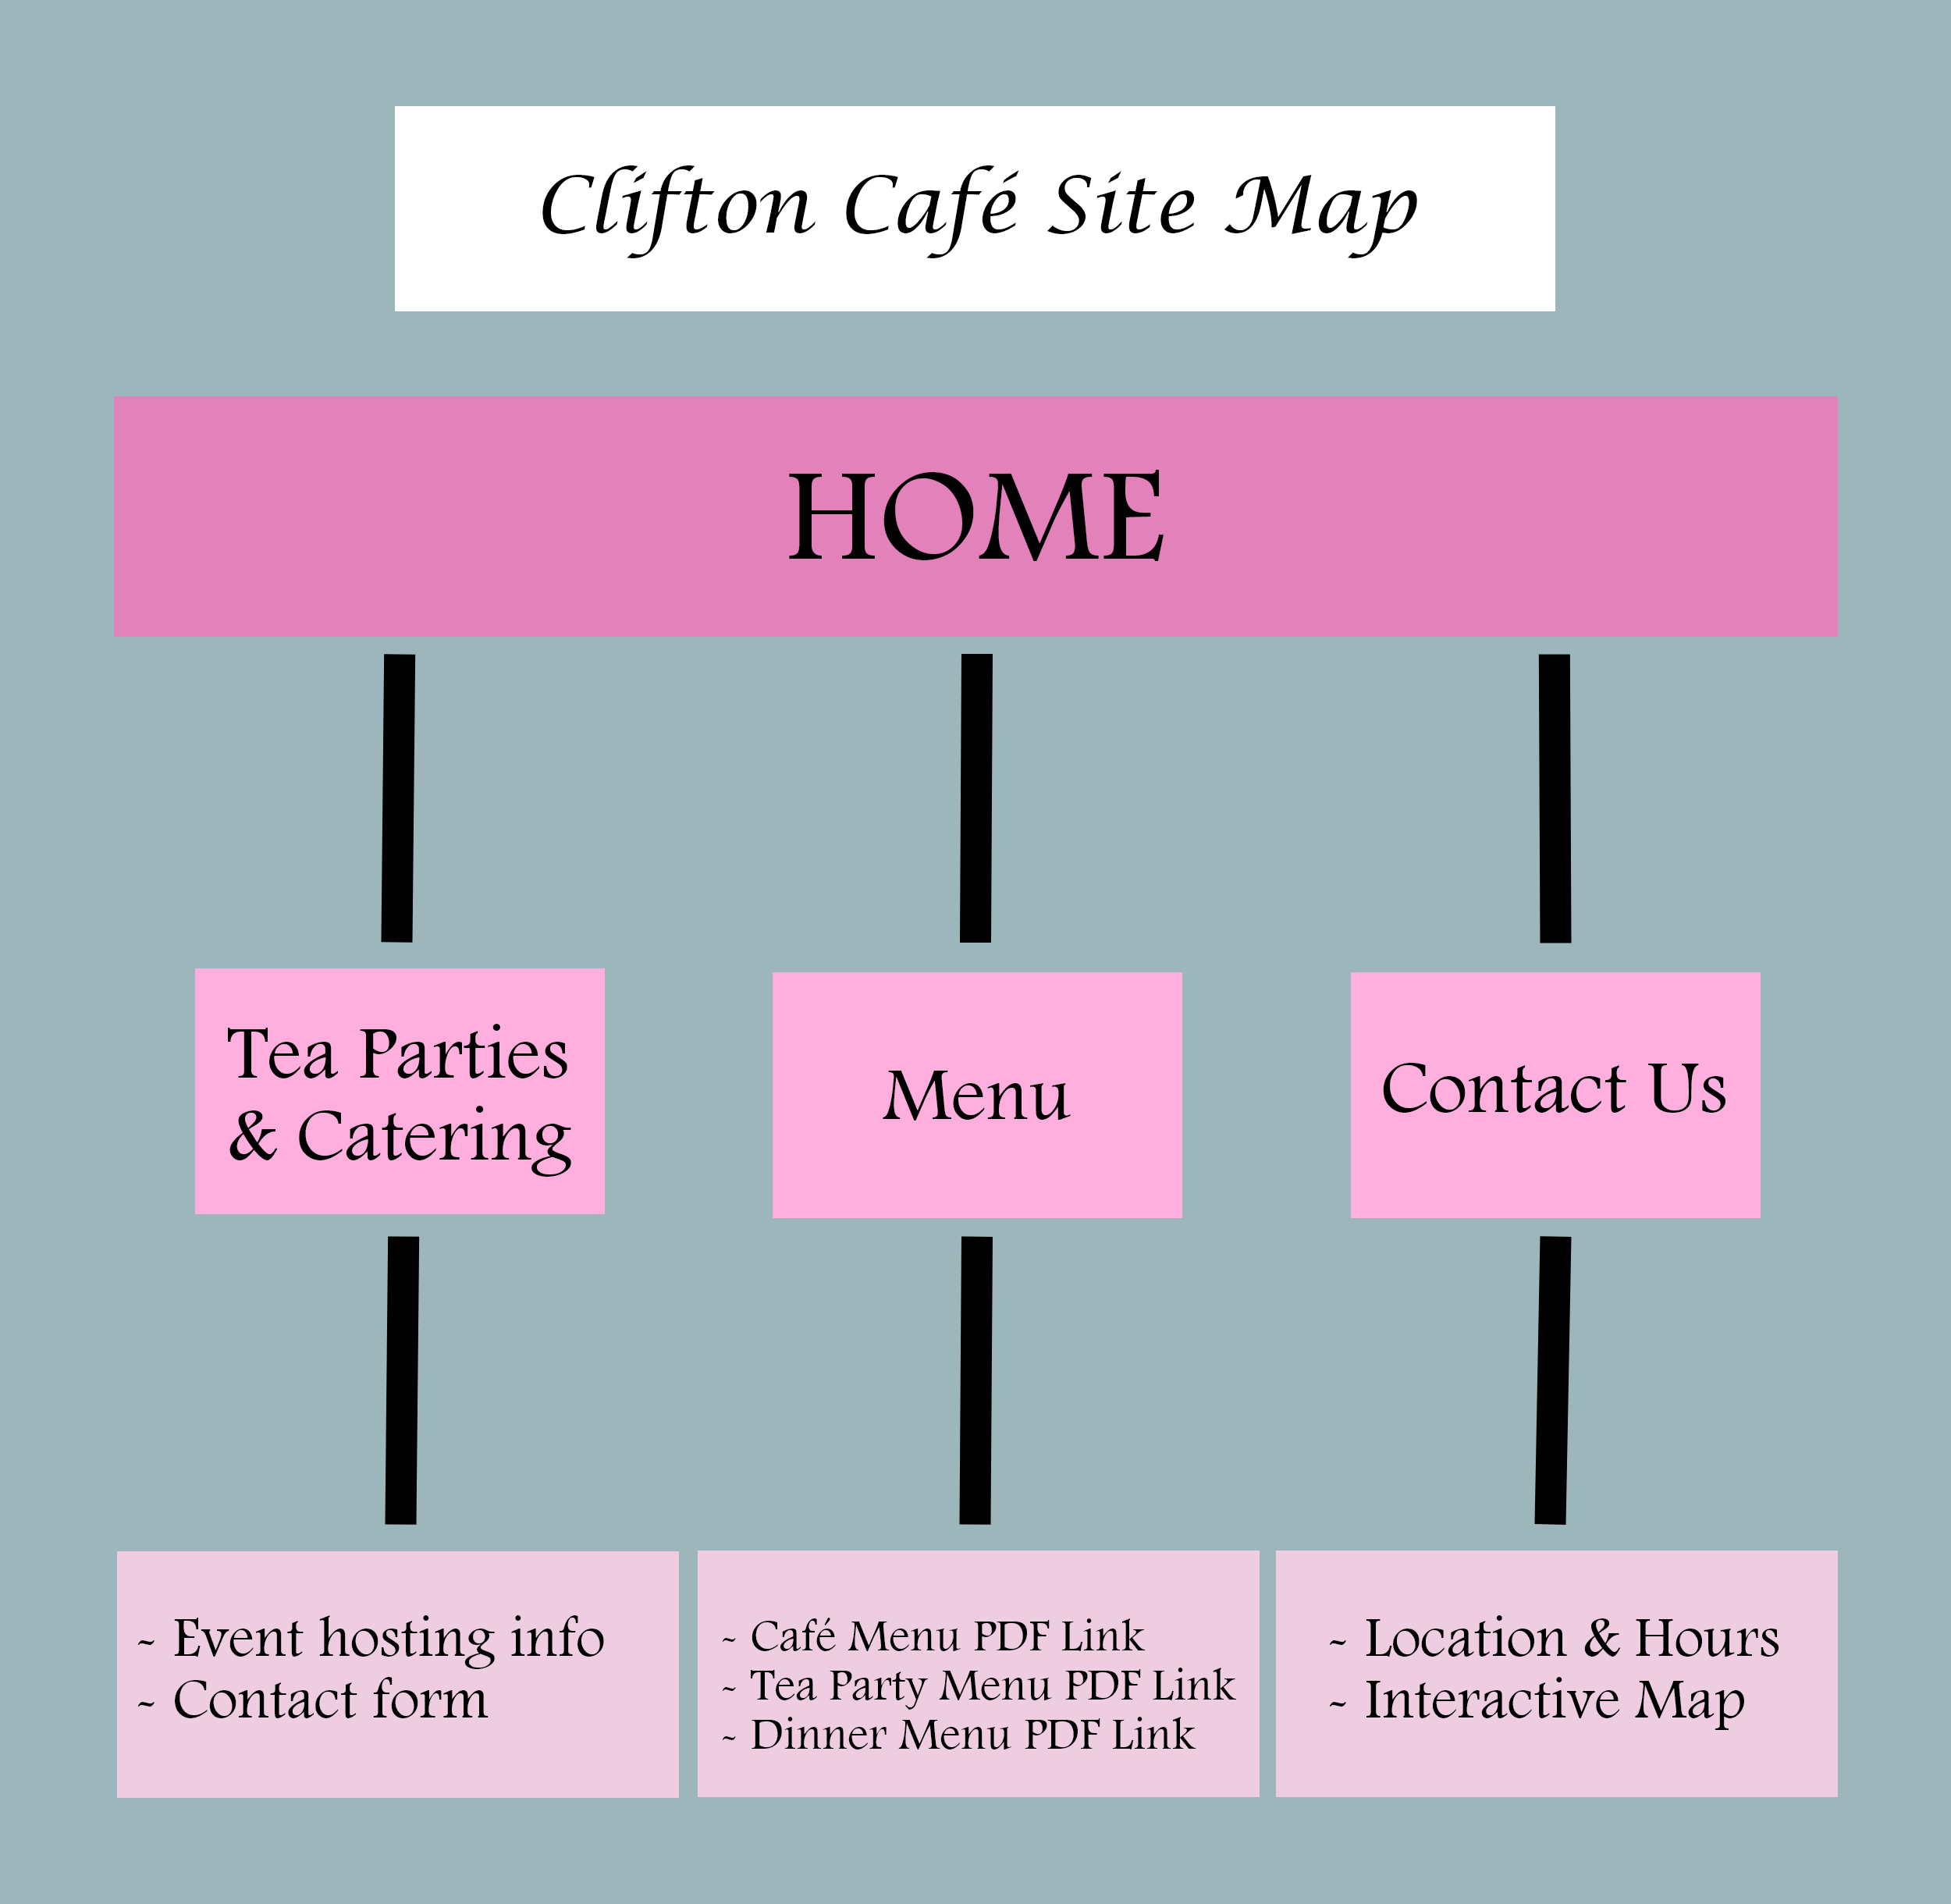 clifton cafe site map